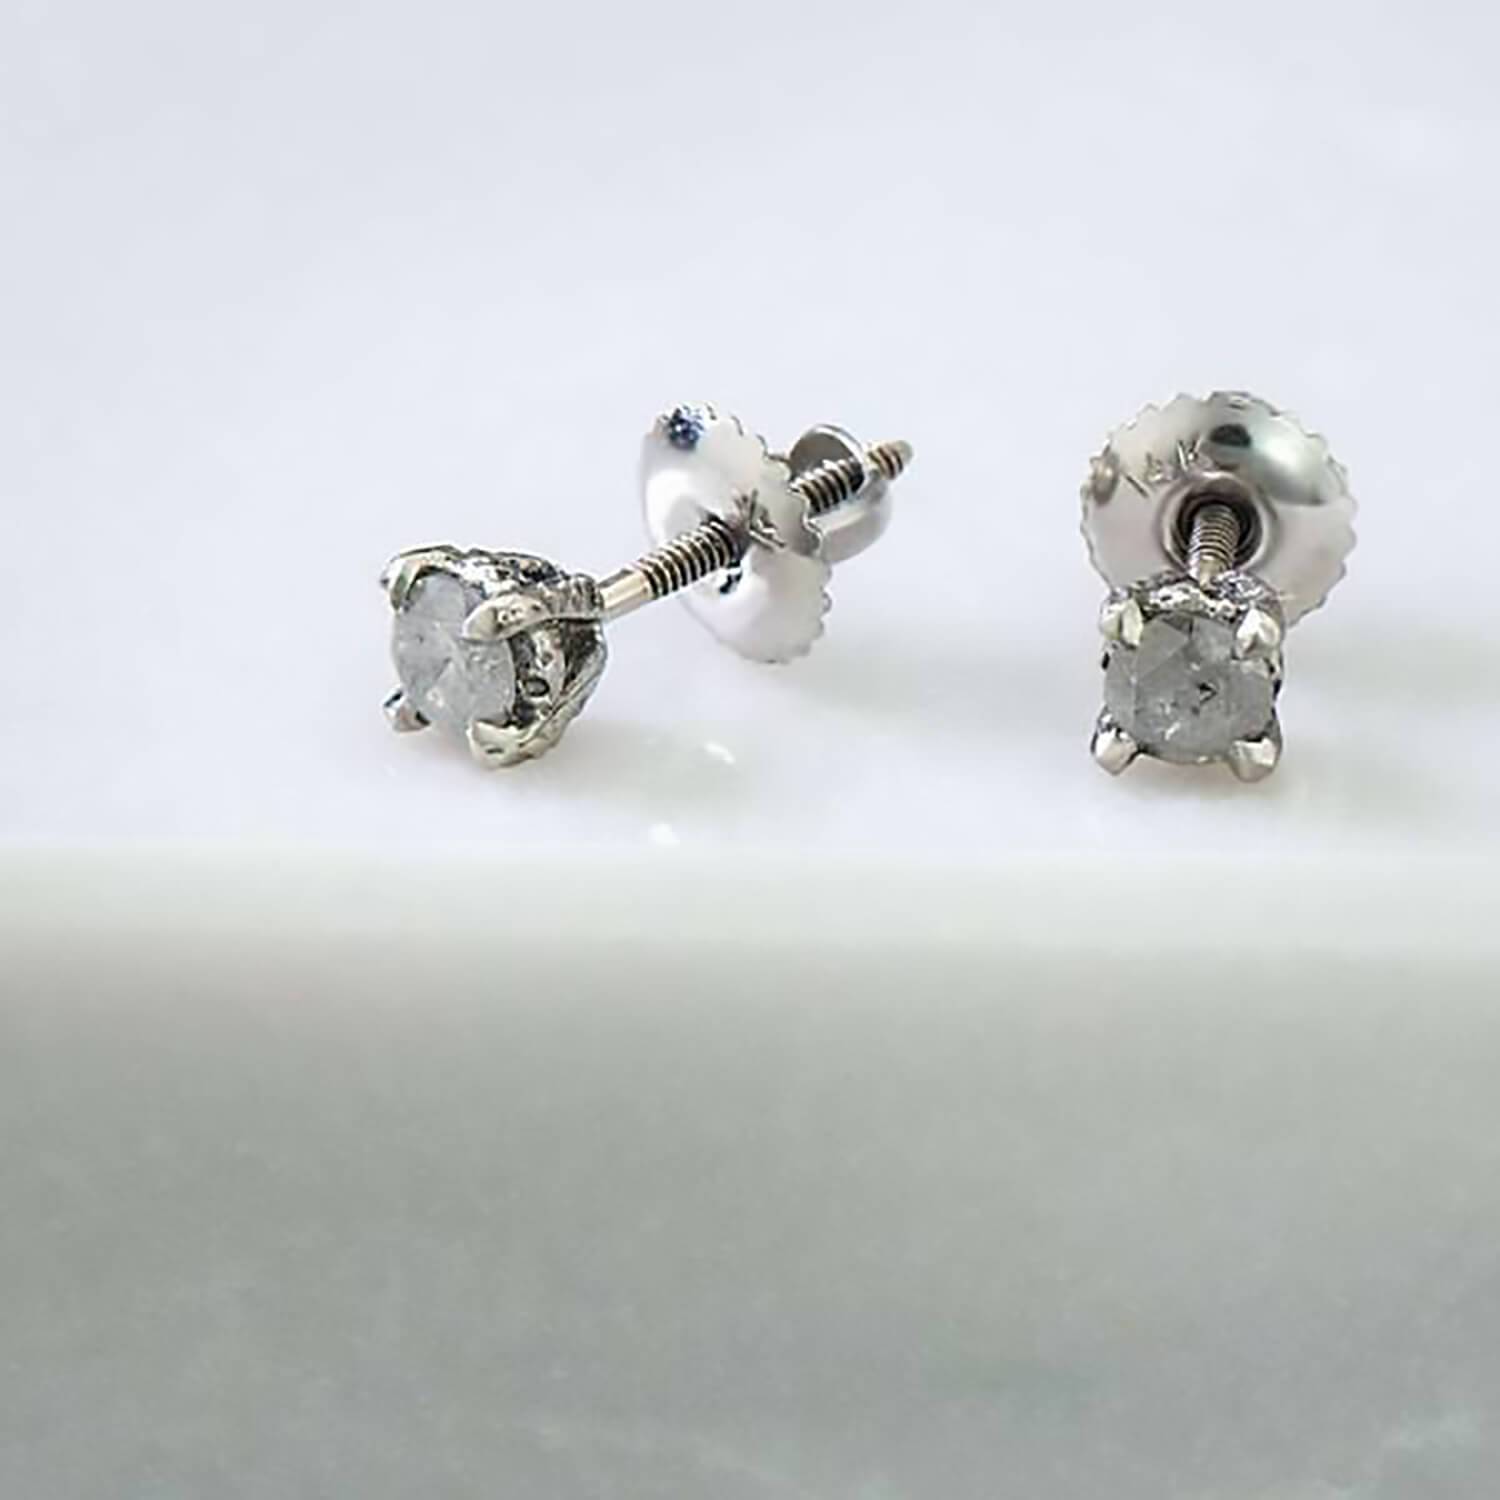 Recycled 14 karat white gold studs with a carved baroque texture and two 4mm natural round salt & pepper diamonds with a screw back system.